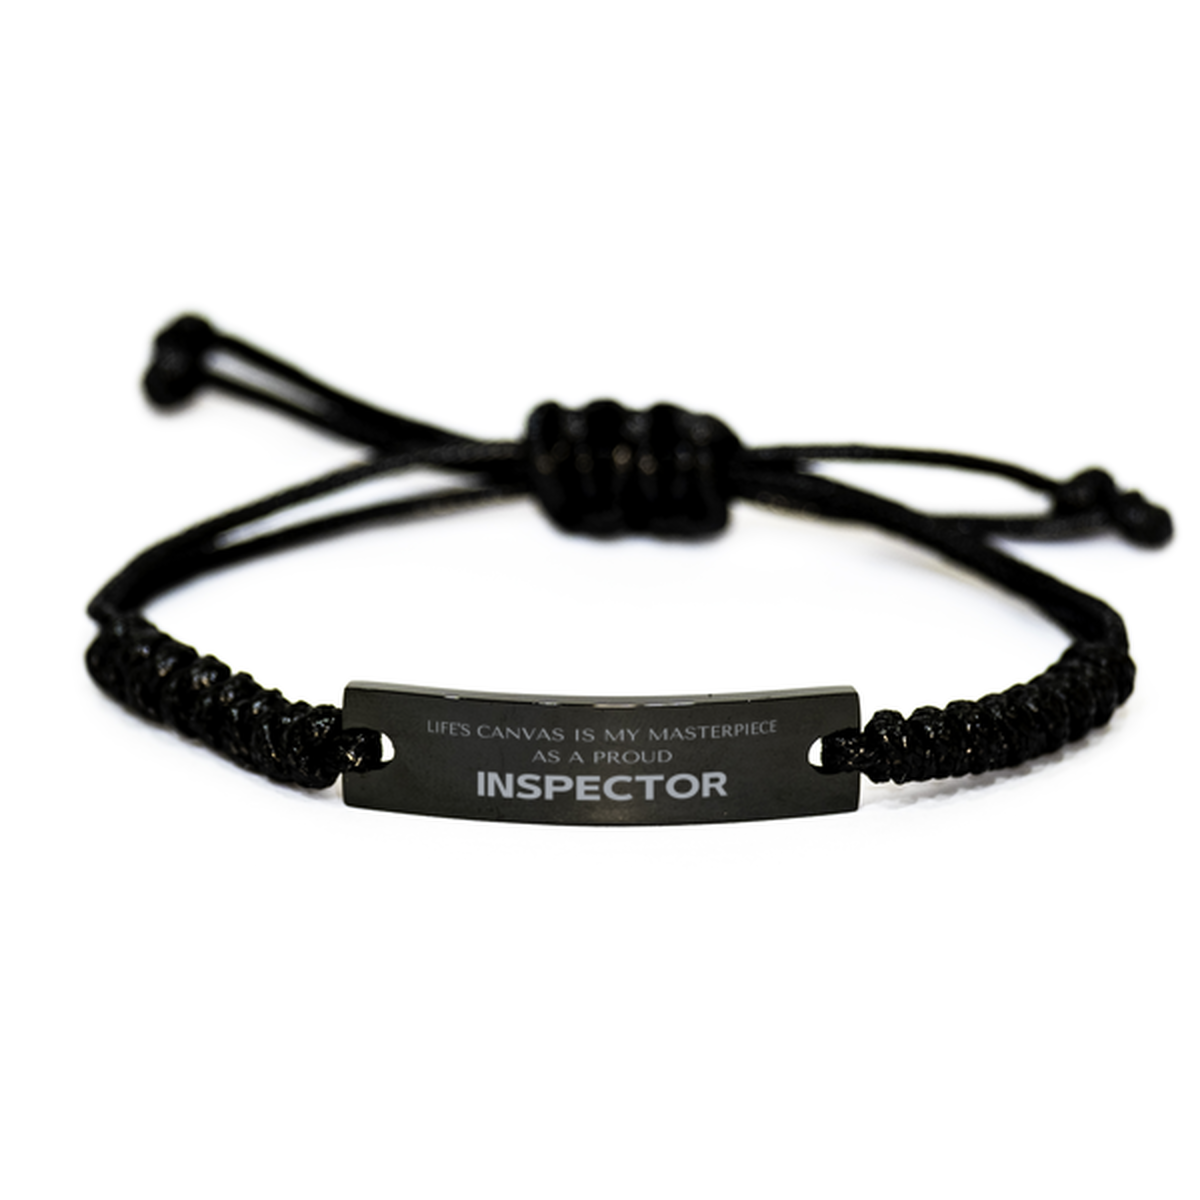 Proud Inspector Gifts, Life's canvas is my masterpiece, Epic Birthday Christmas Unique Black Rope Bracelet For Inspector, Coworkers, Men, Women, Friends